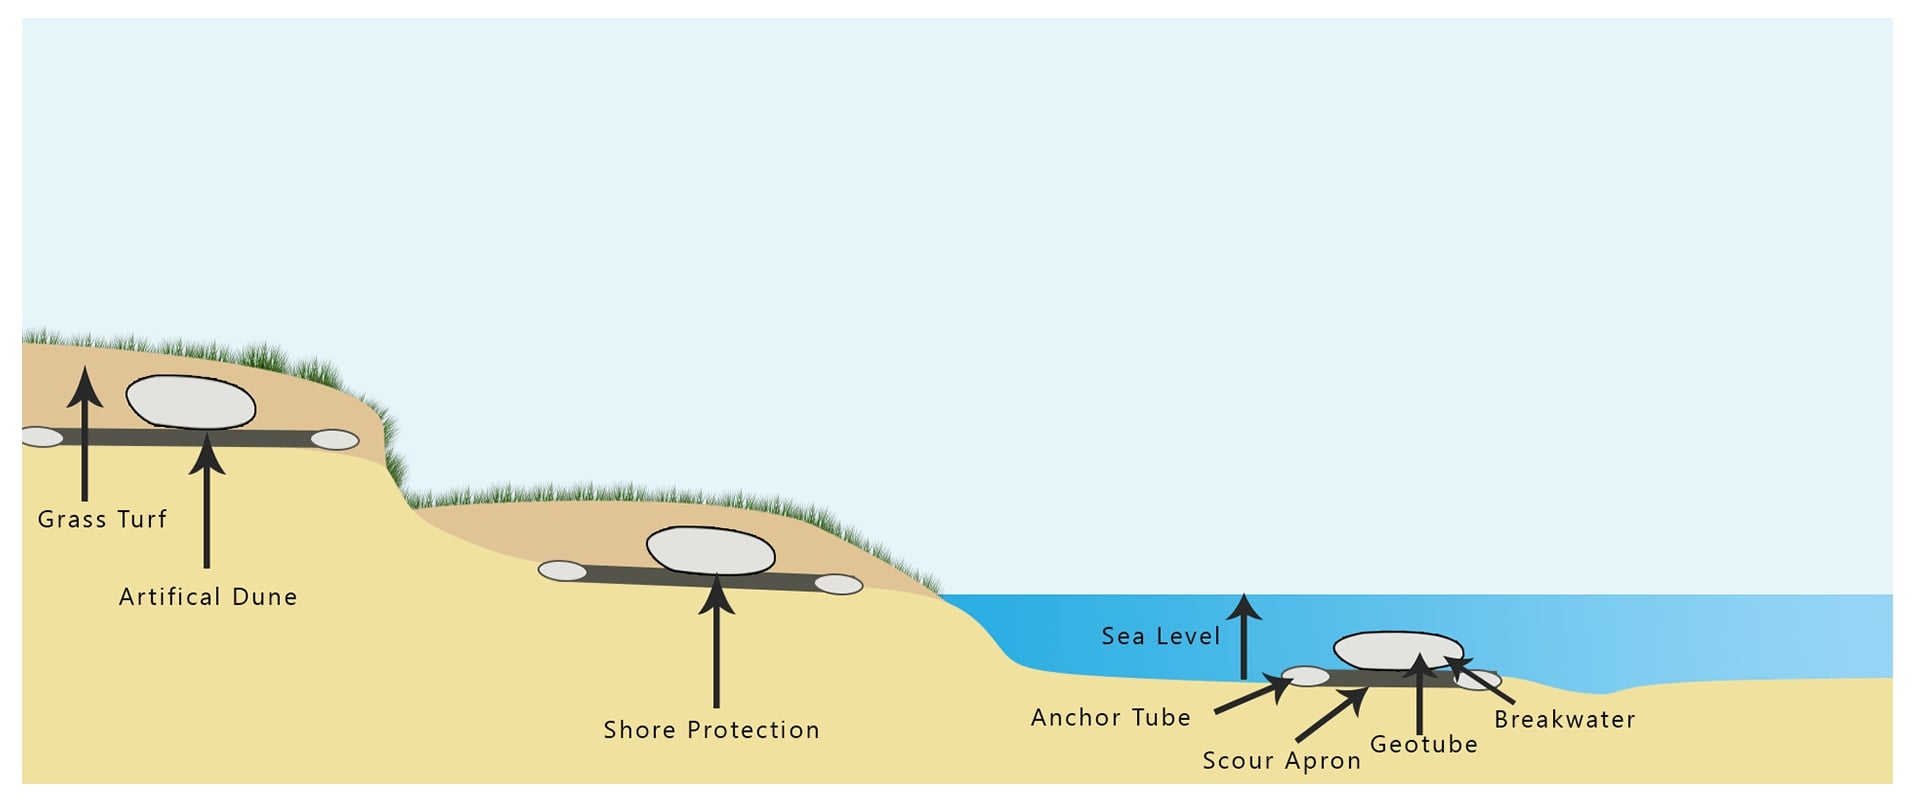 Geotube is used in shoreline management to protect against erosion and flooding